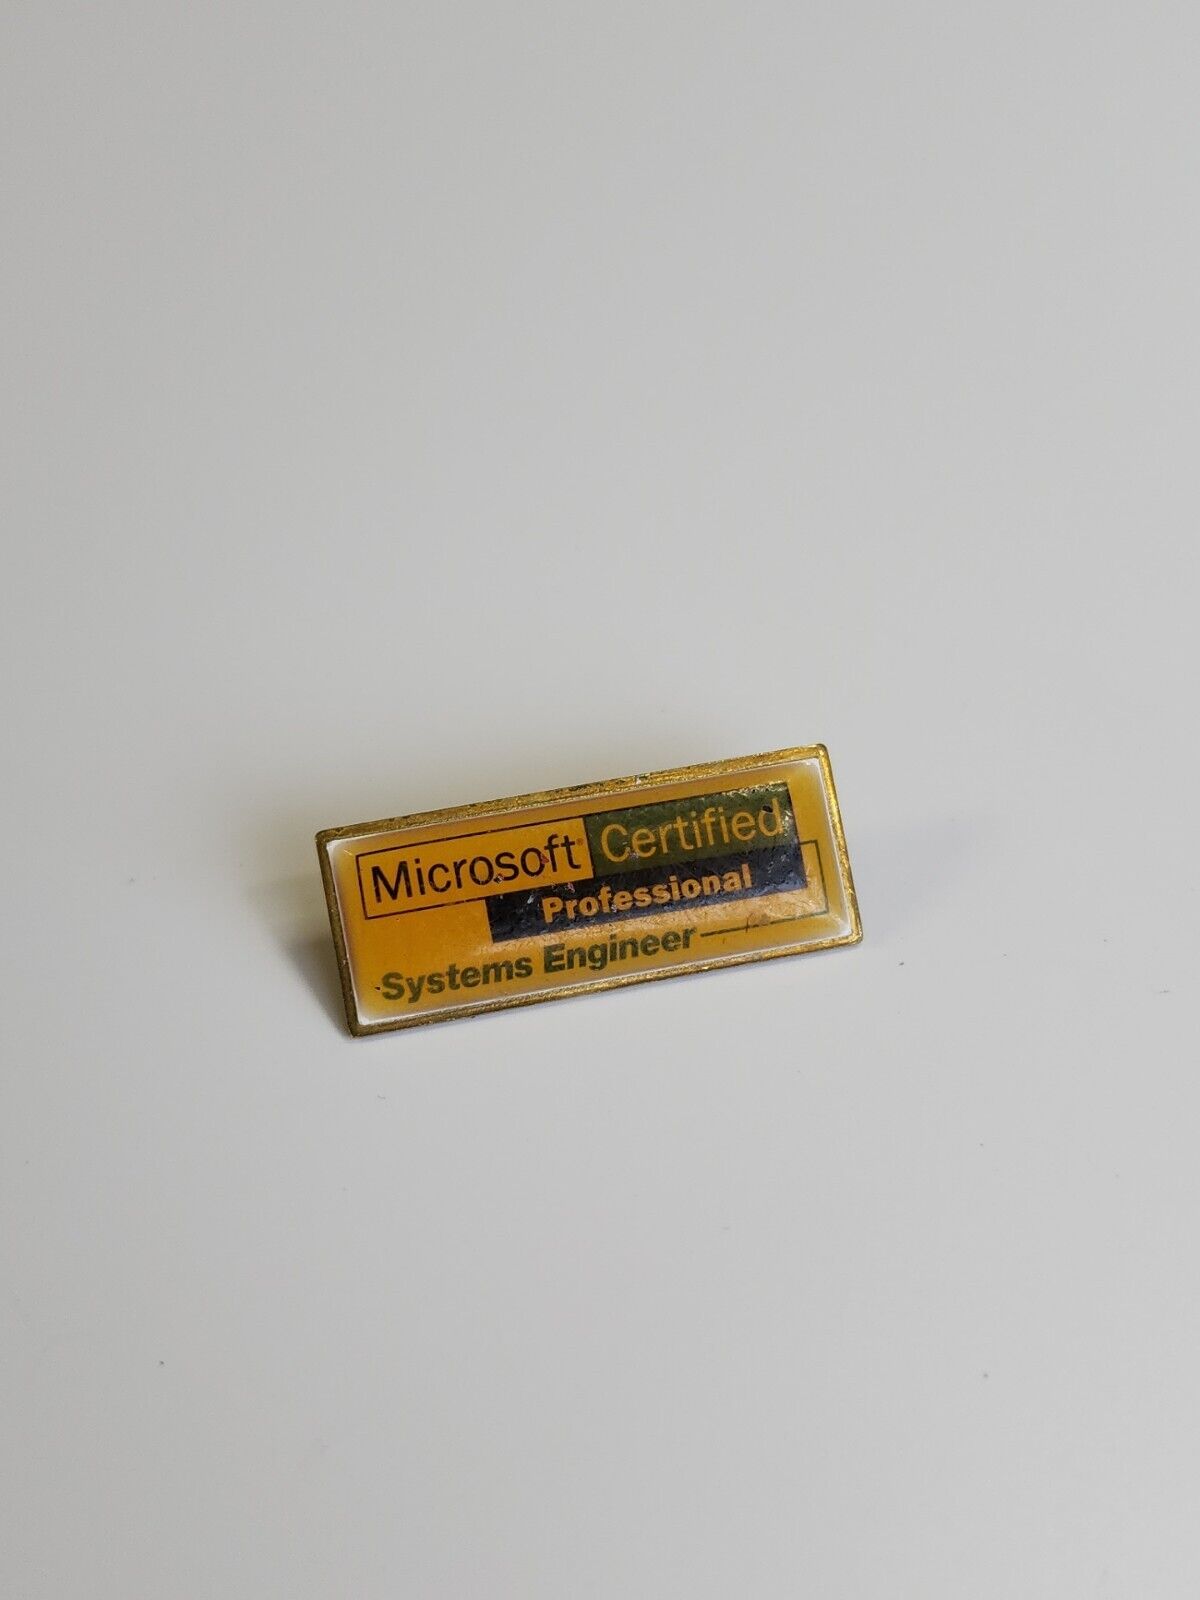 Microsoft Certified Professional Systems Engineer Employee Lapel Pin Vintage